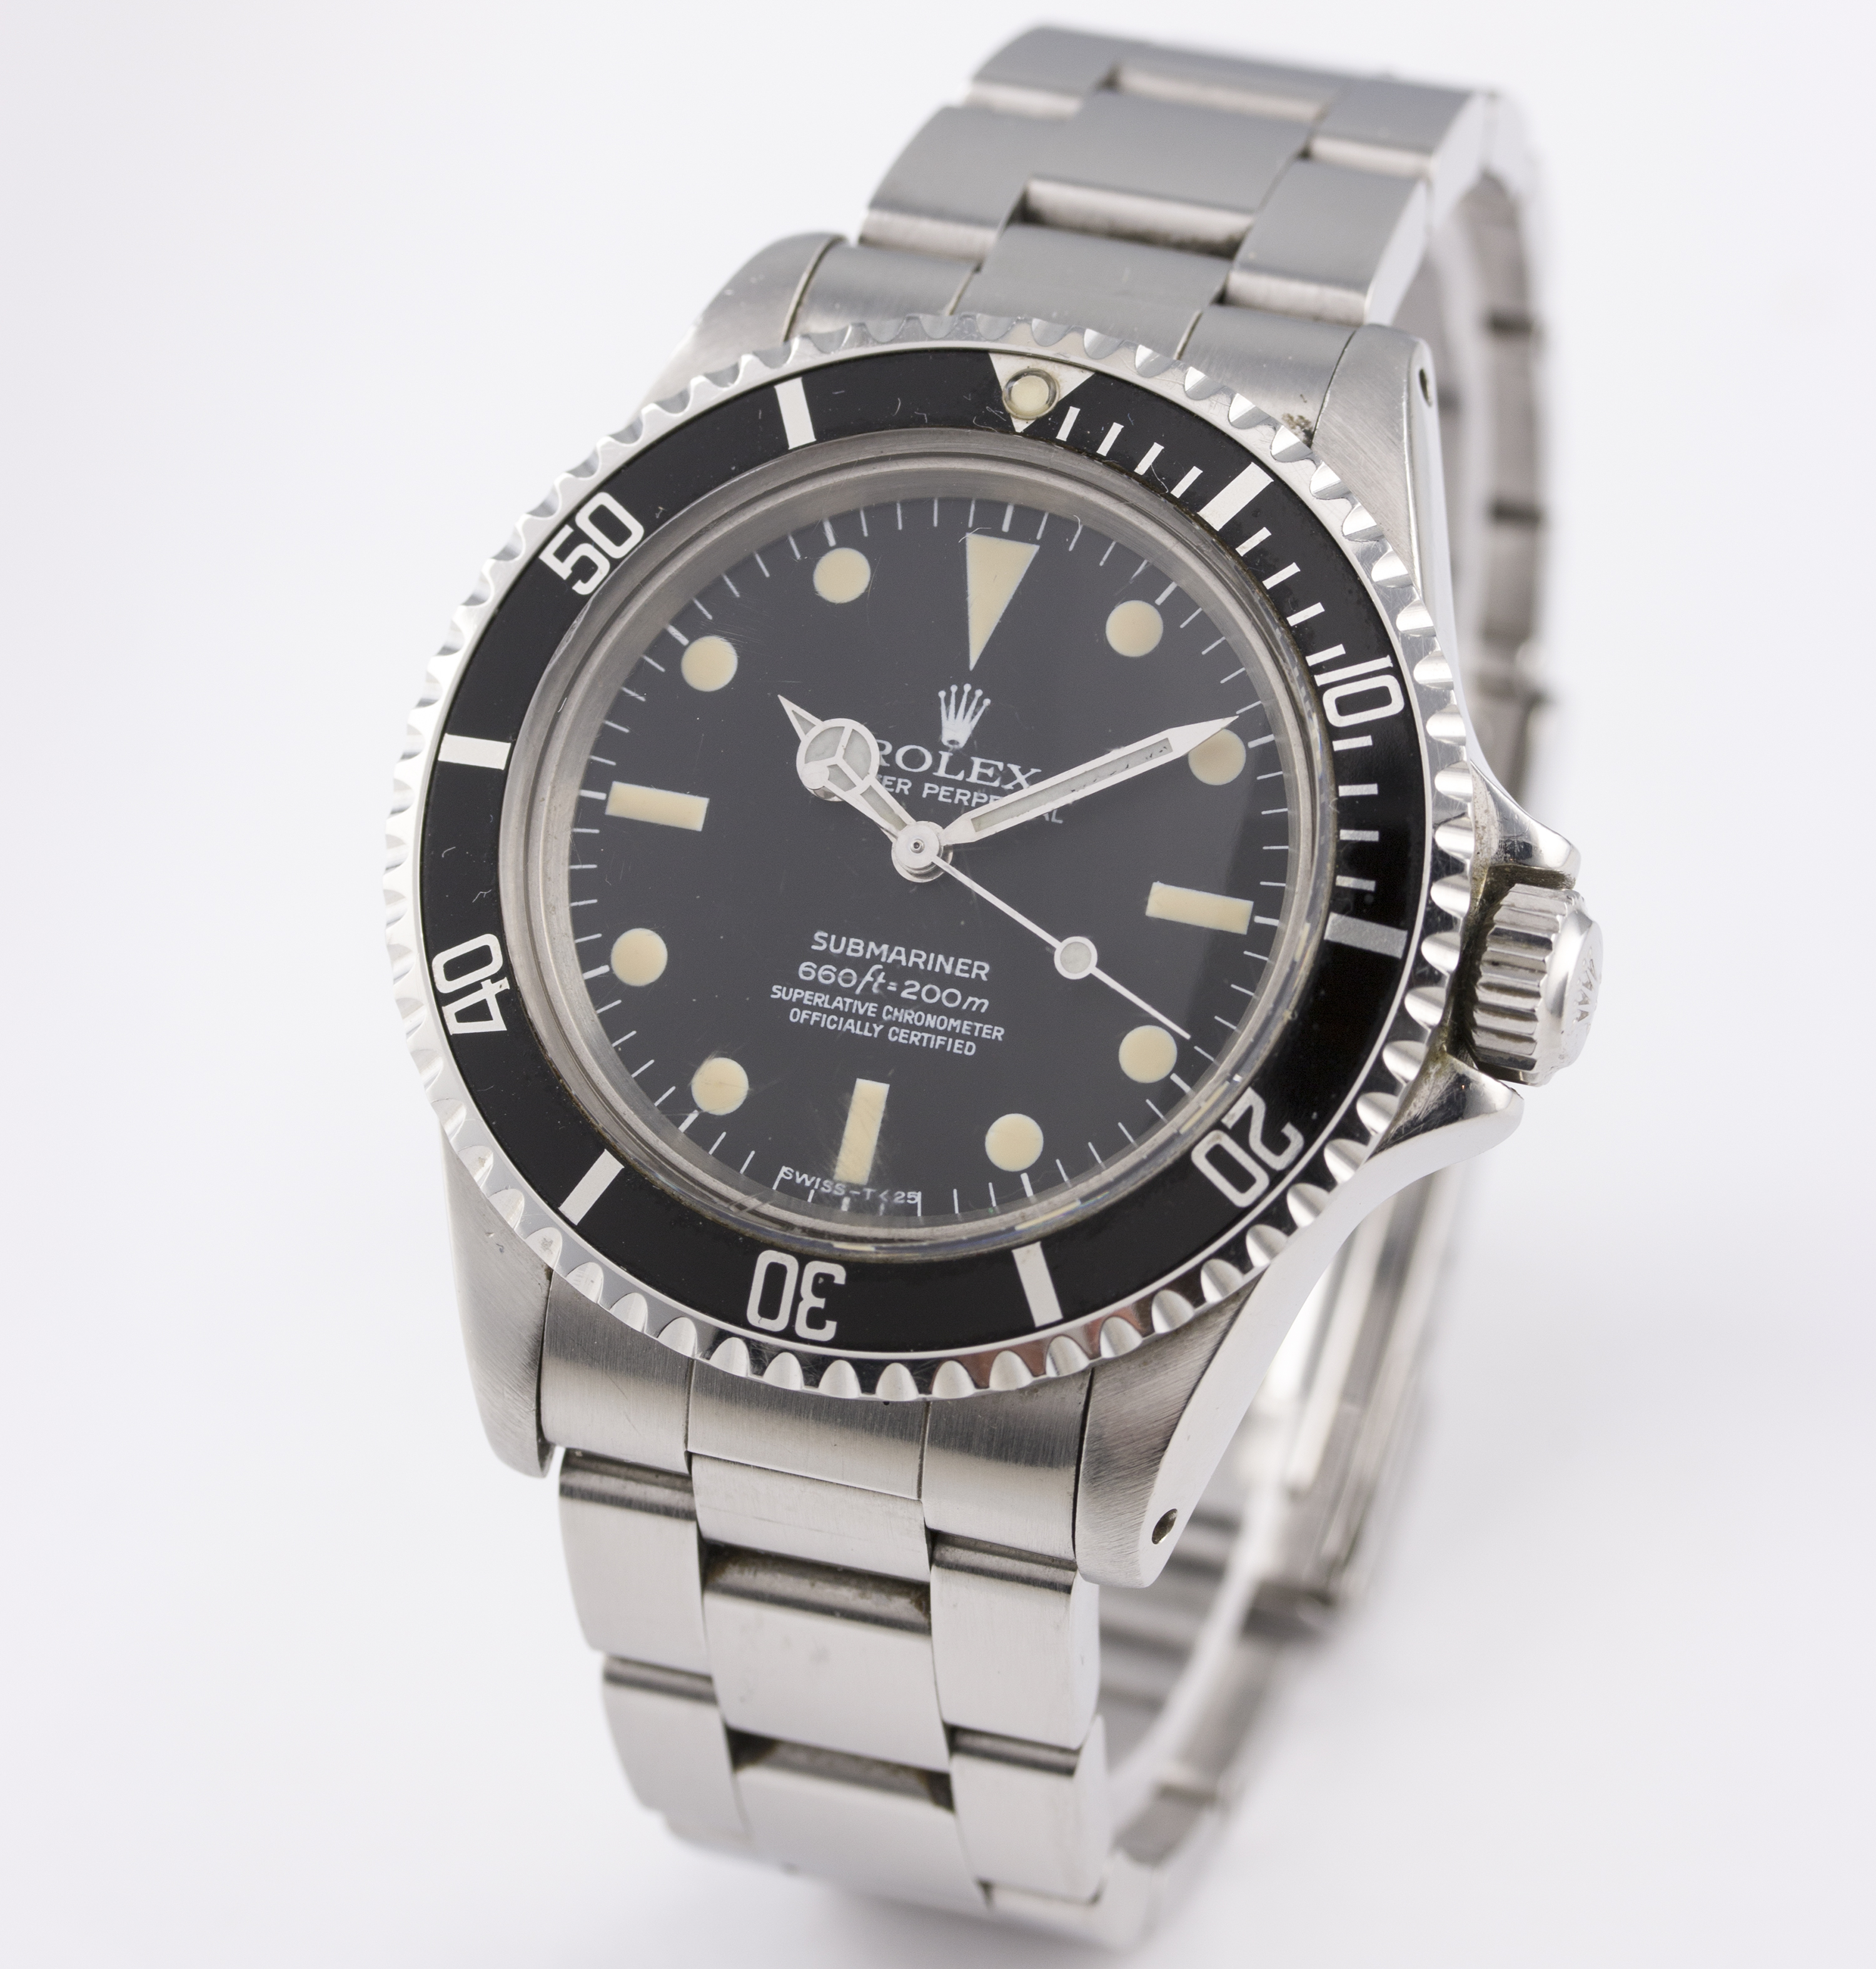 A GENTLEMAN'S STAINLESS STEEL ROLEX OYSTER PERPETUAL SUBMARINER CHRONOMETER BRACELET WATCH CIRCA - Image 2 of 9